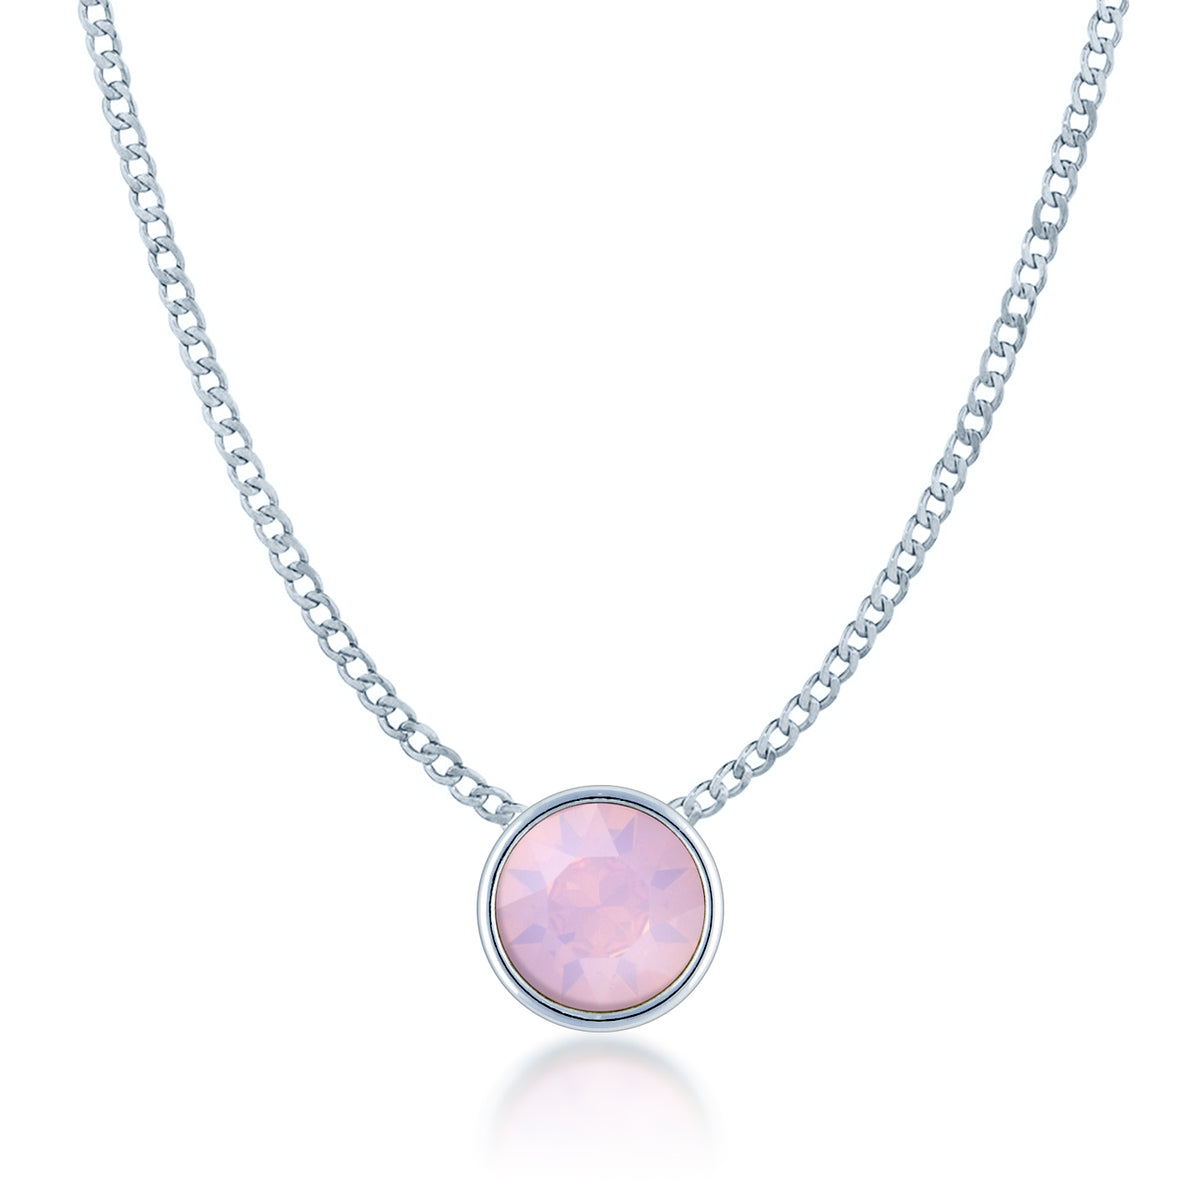 Harley Small Pendant Necklace with Pink Rose Water Round Opals from Swarovski Silver Toned Rhodium Plated - Ed Heart